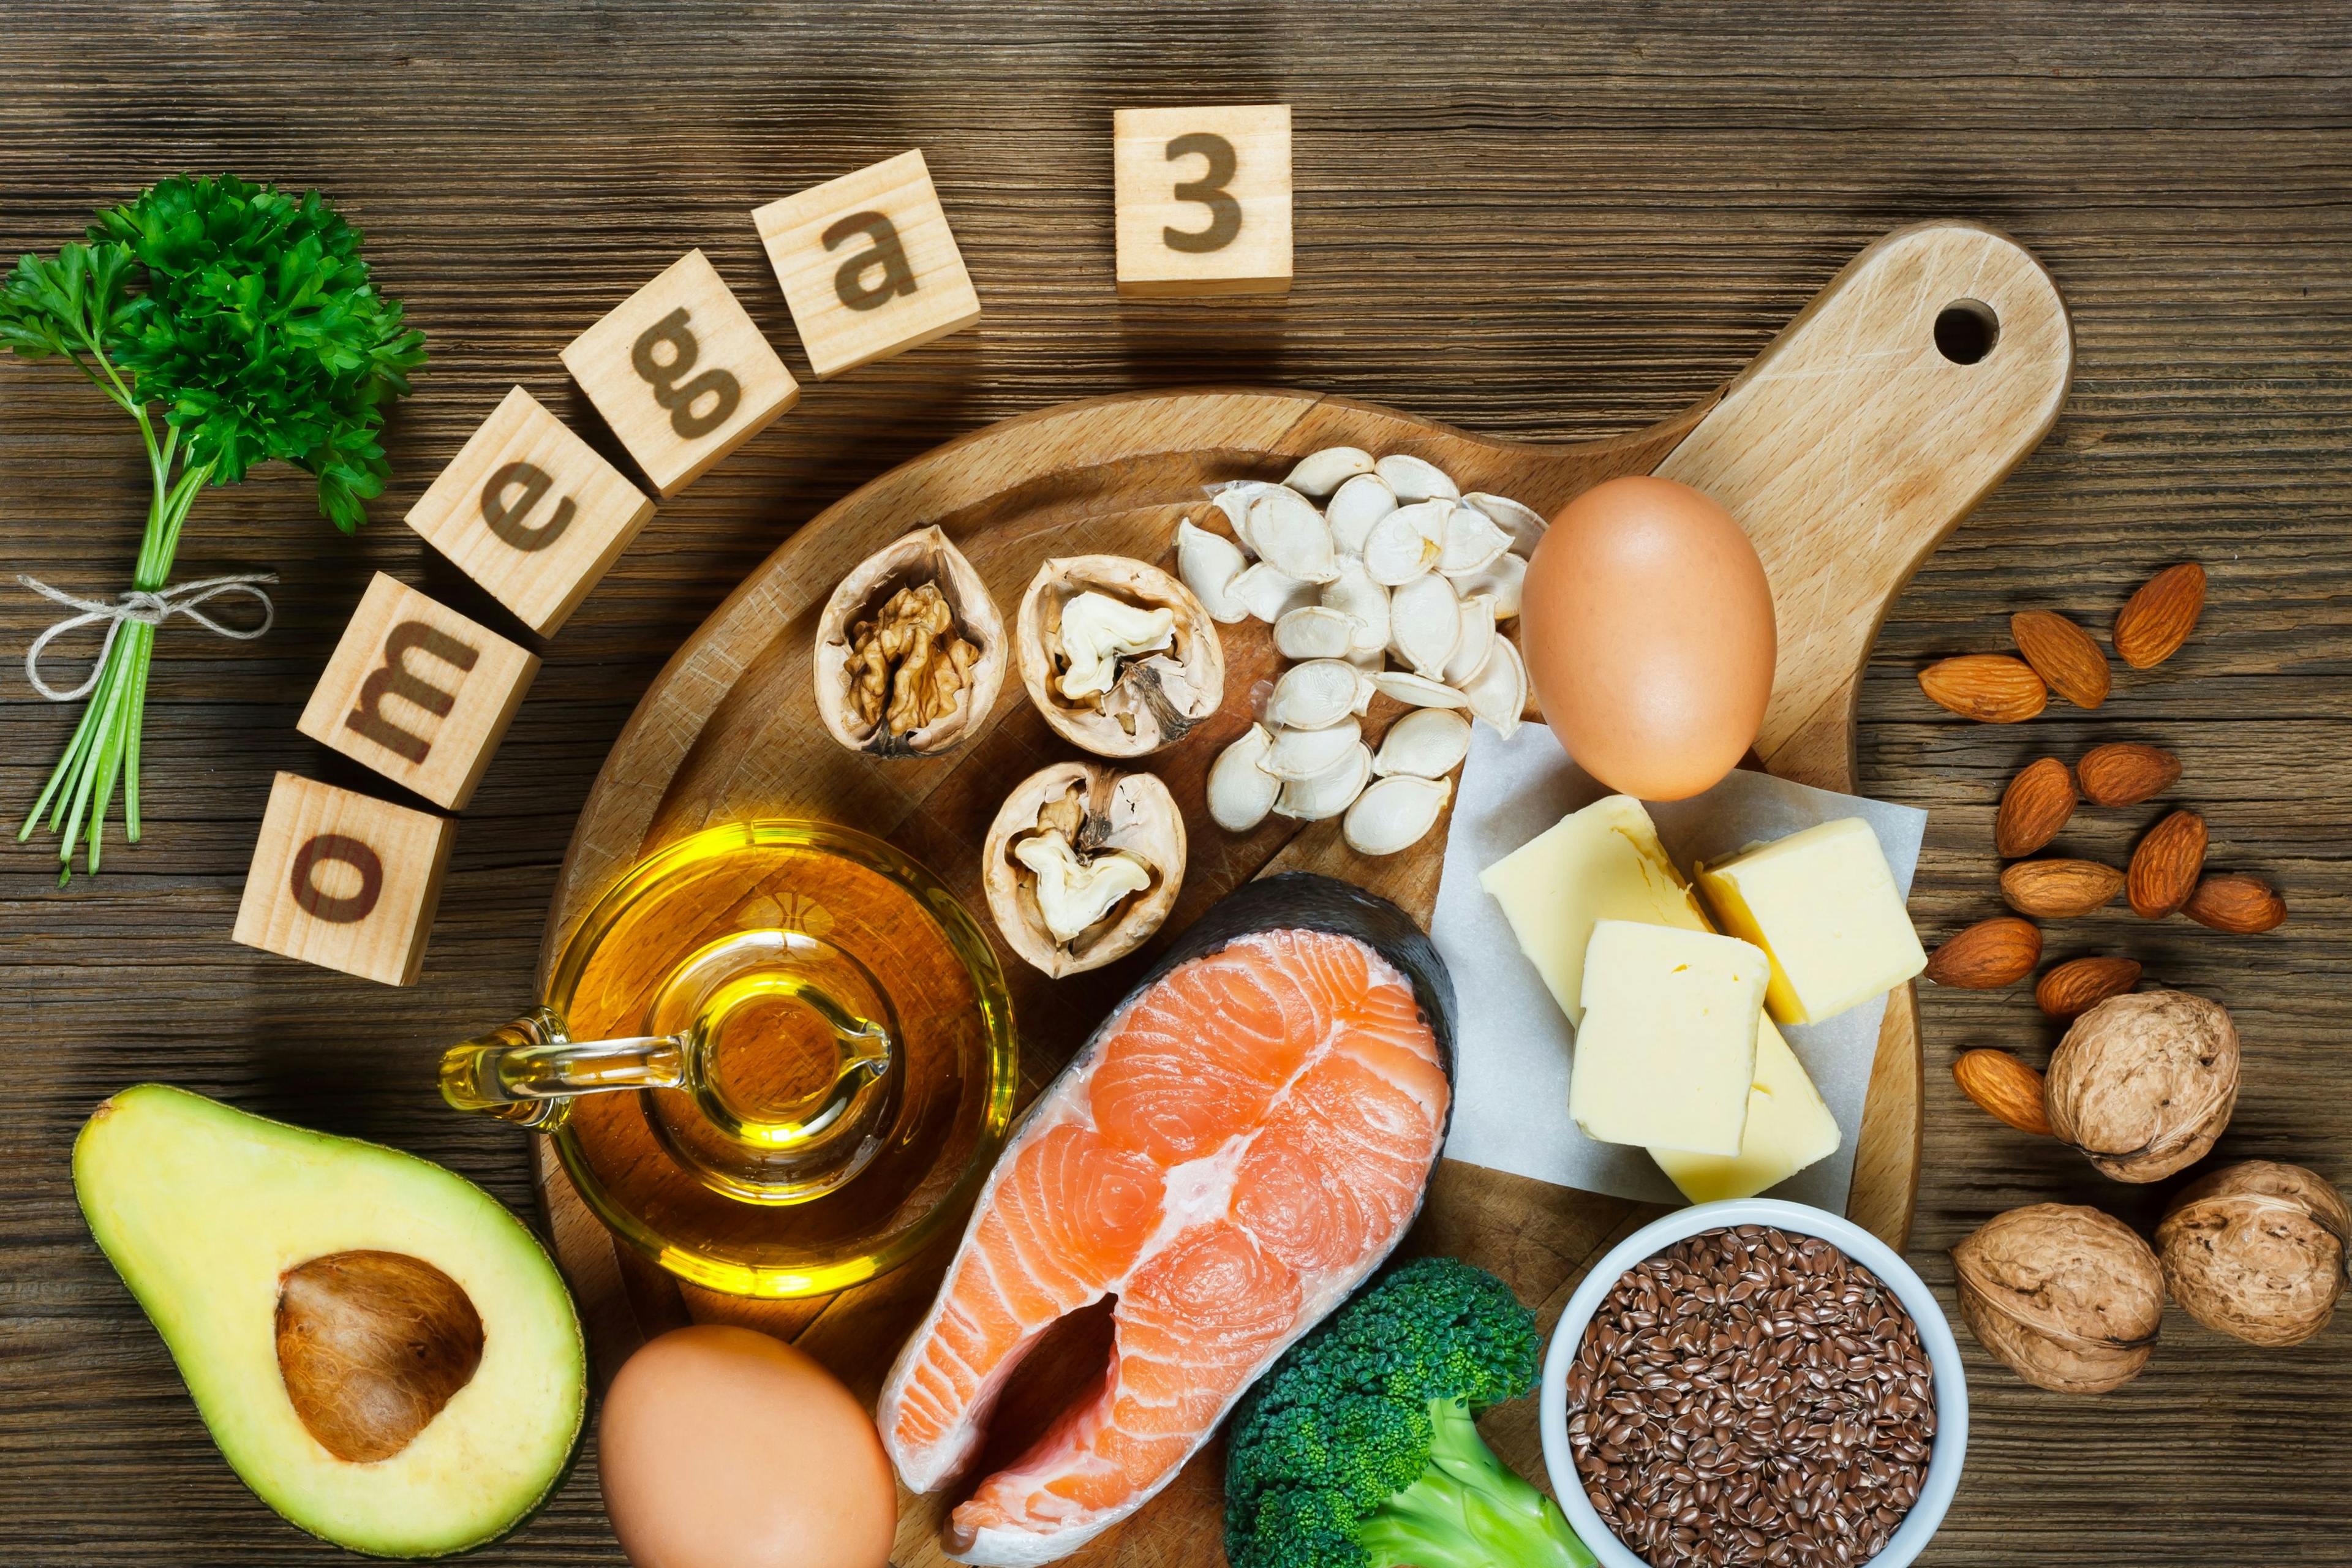 A Higher Omega-3 Index Protects Against Severe COVID-19 Infection